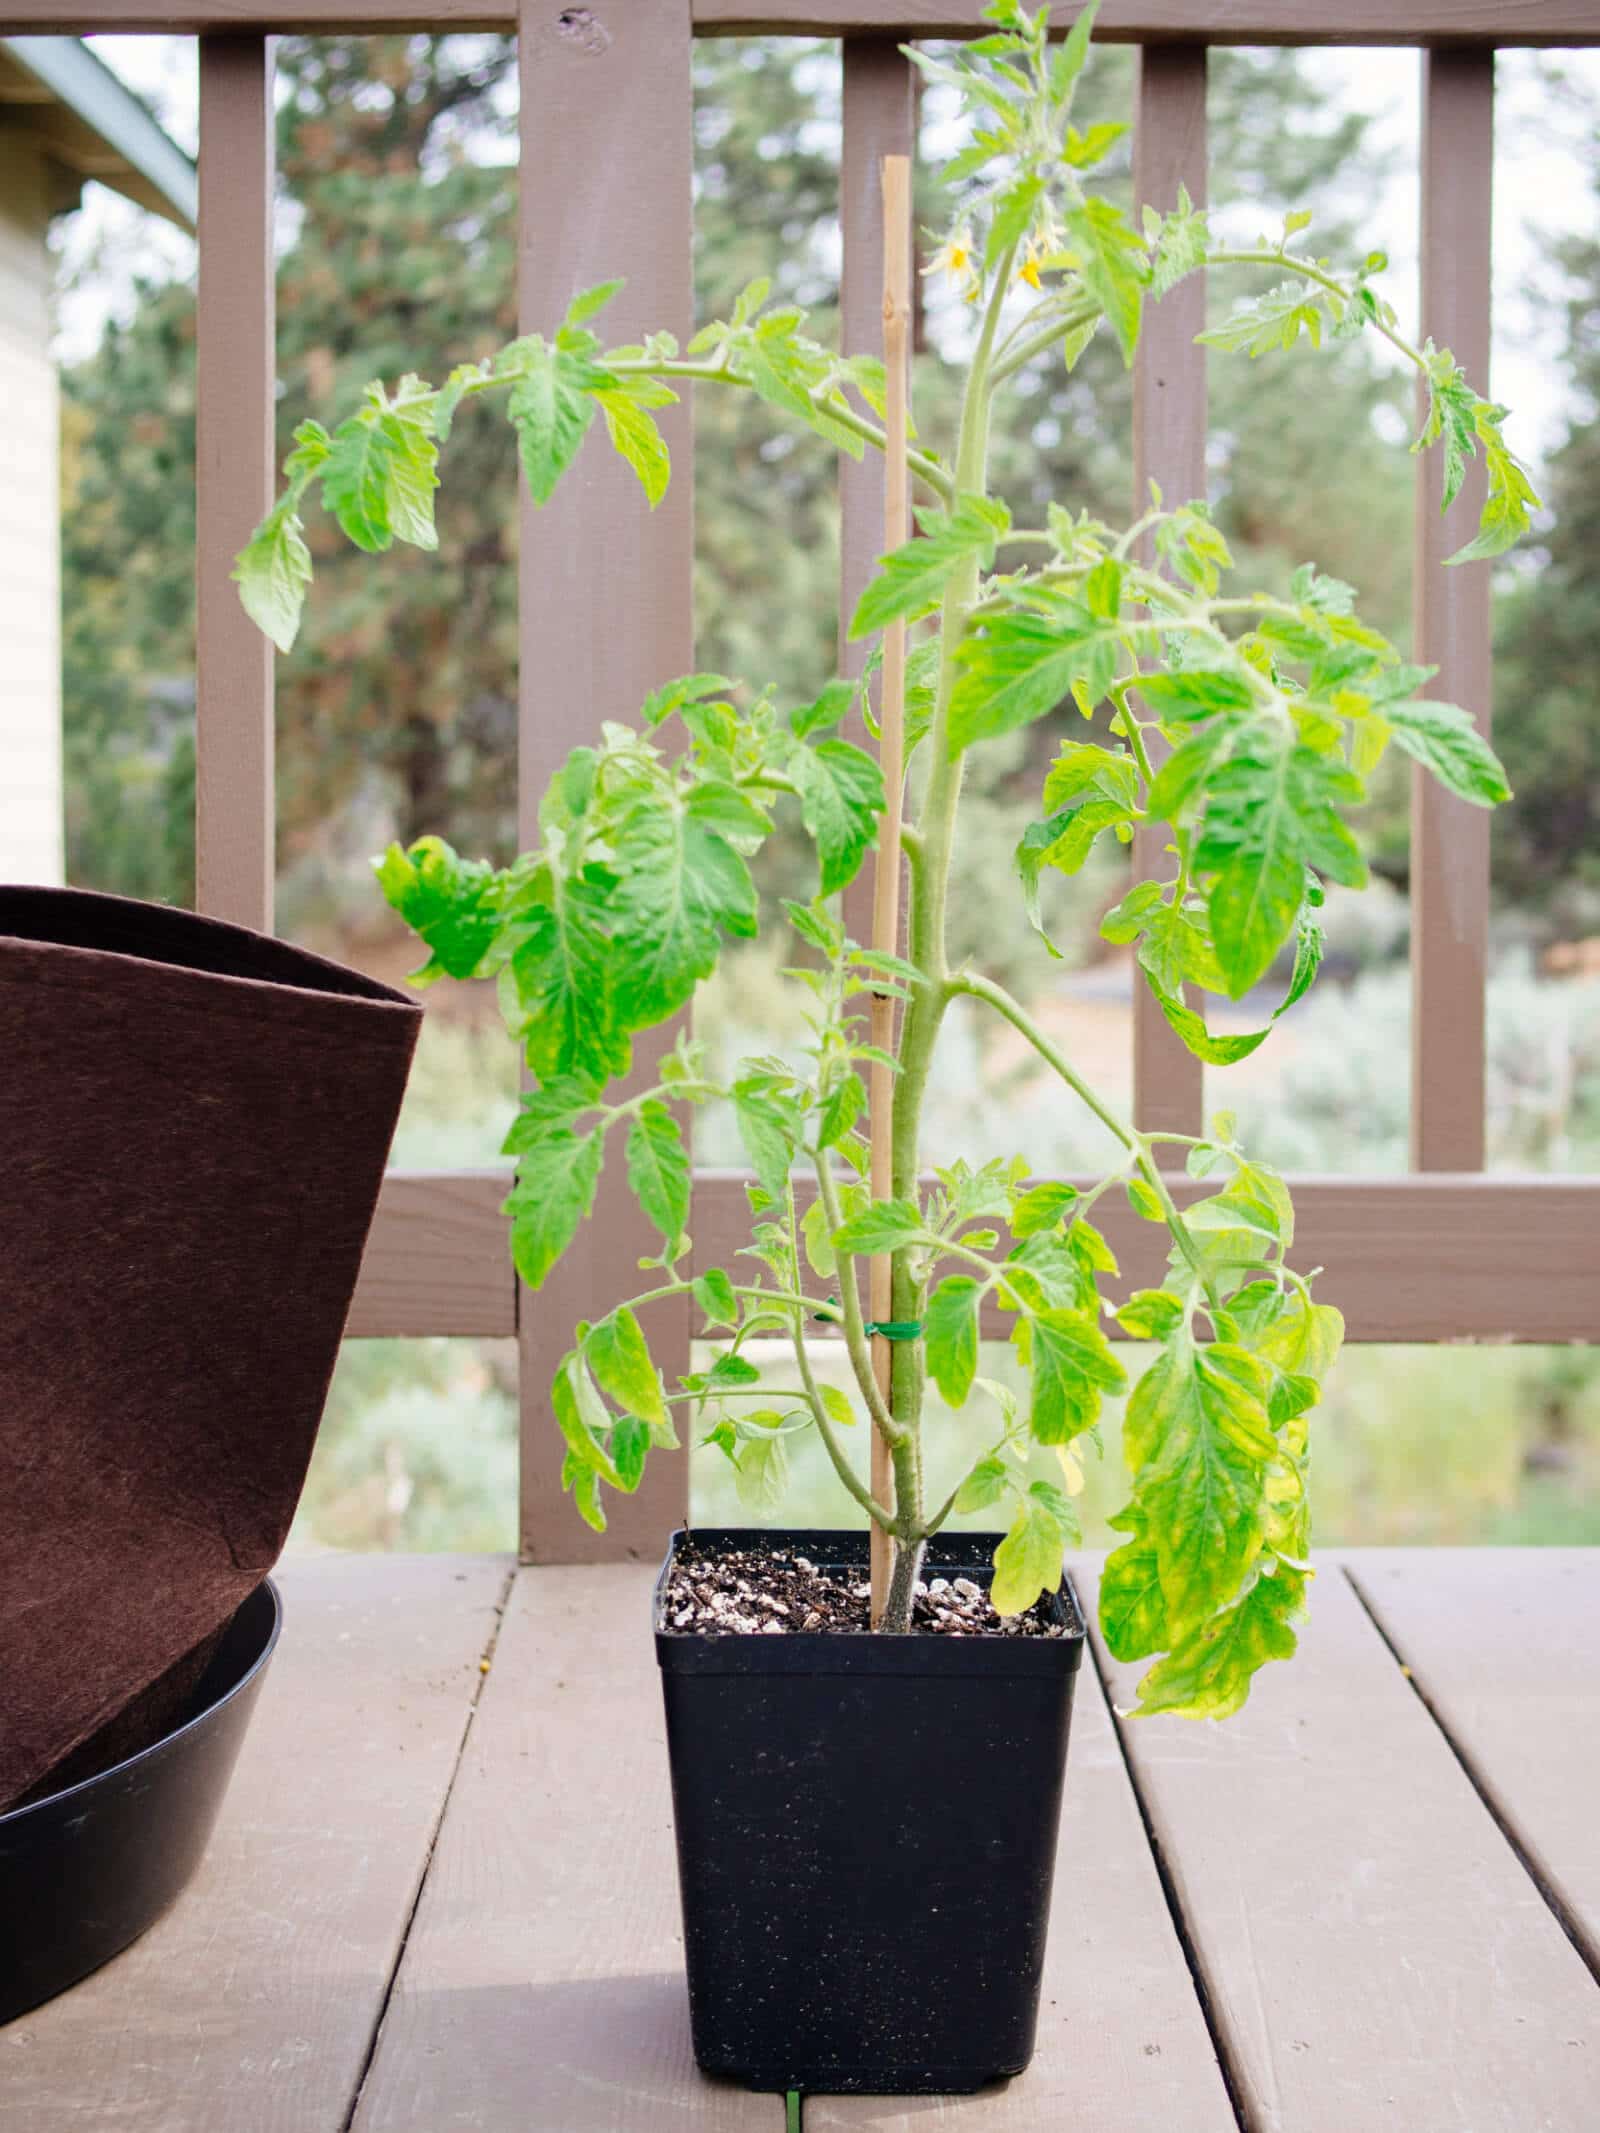 Start with a strong and healthy tomato transplant